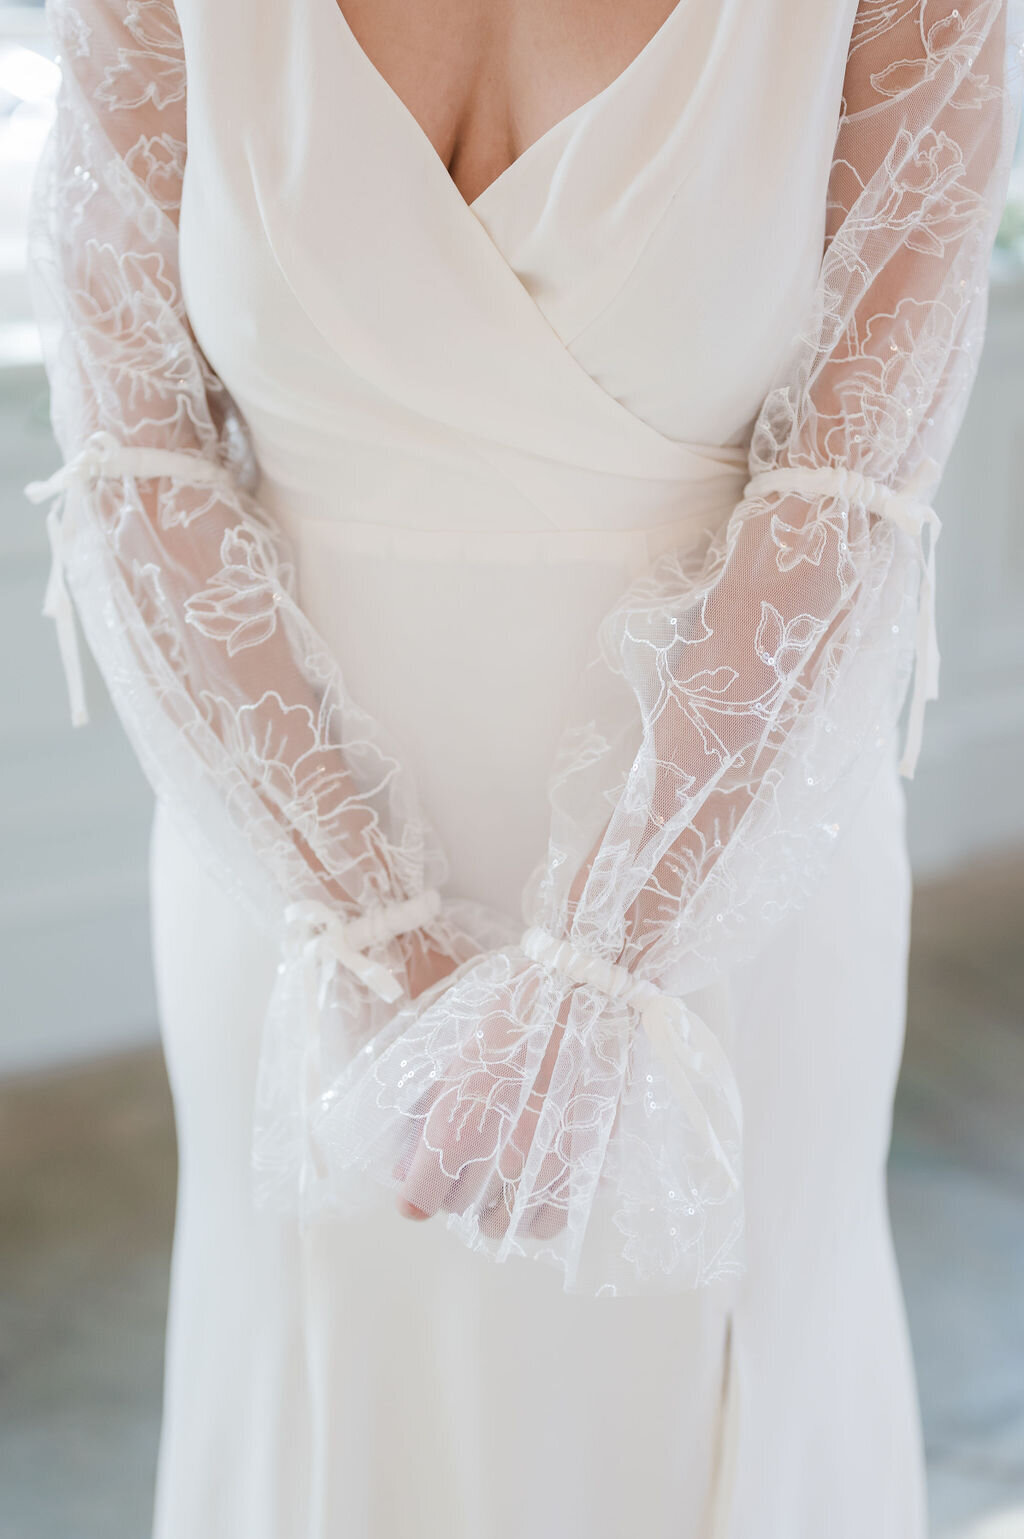 Close-up of the sheer sparkly lace sleeves of the Harlow wedding dress style. The sleeves feature bows at the elbow and wrist.